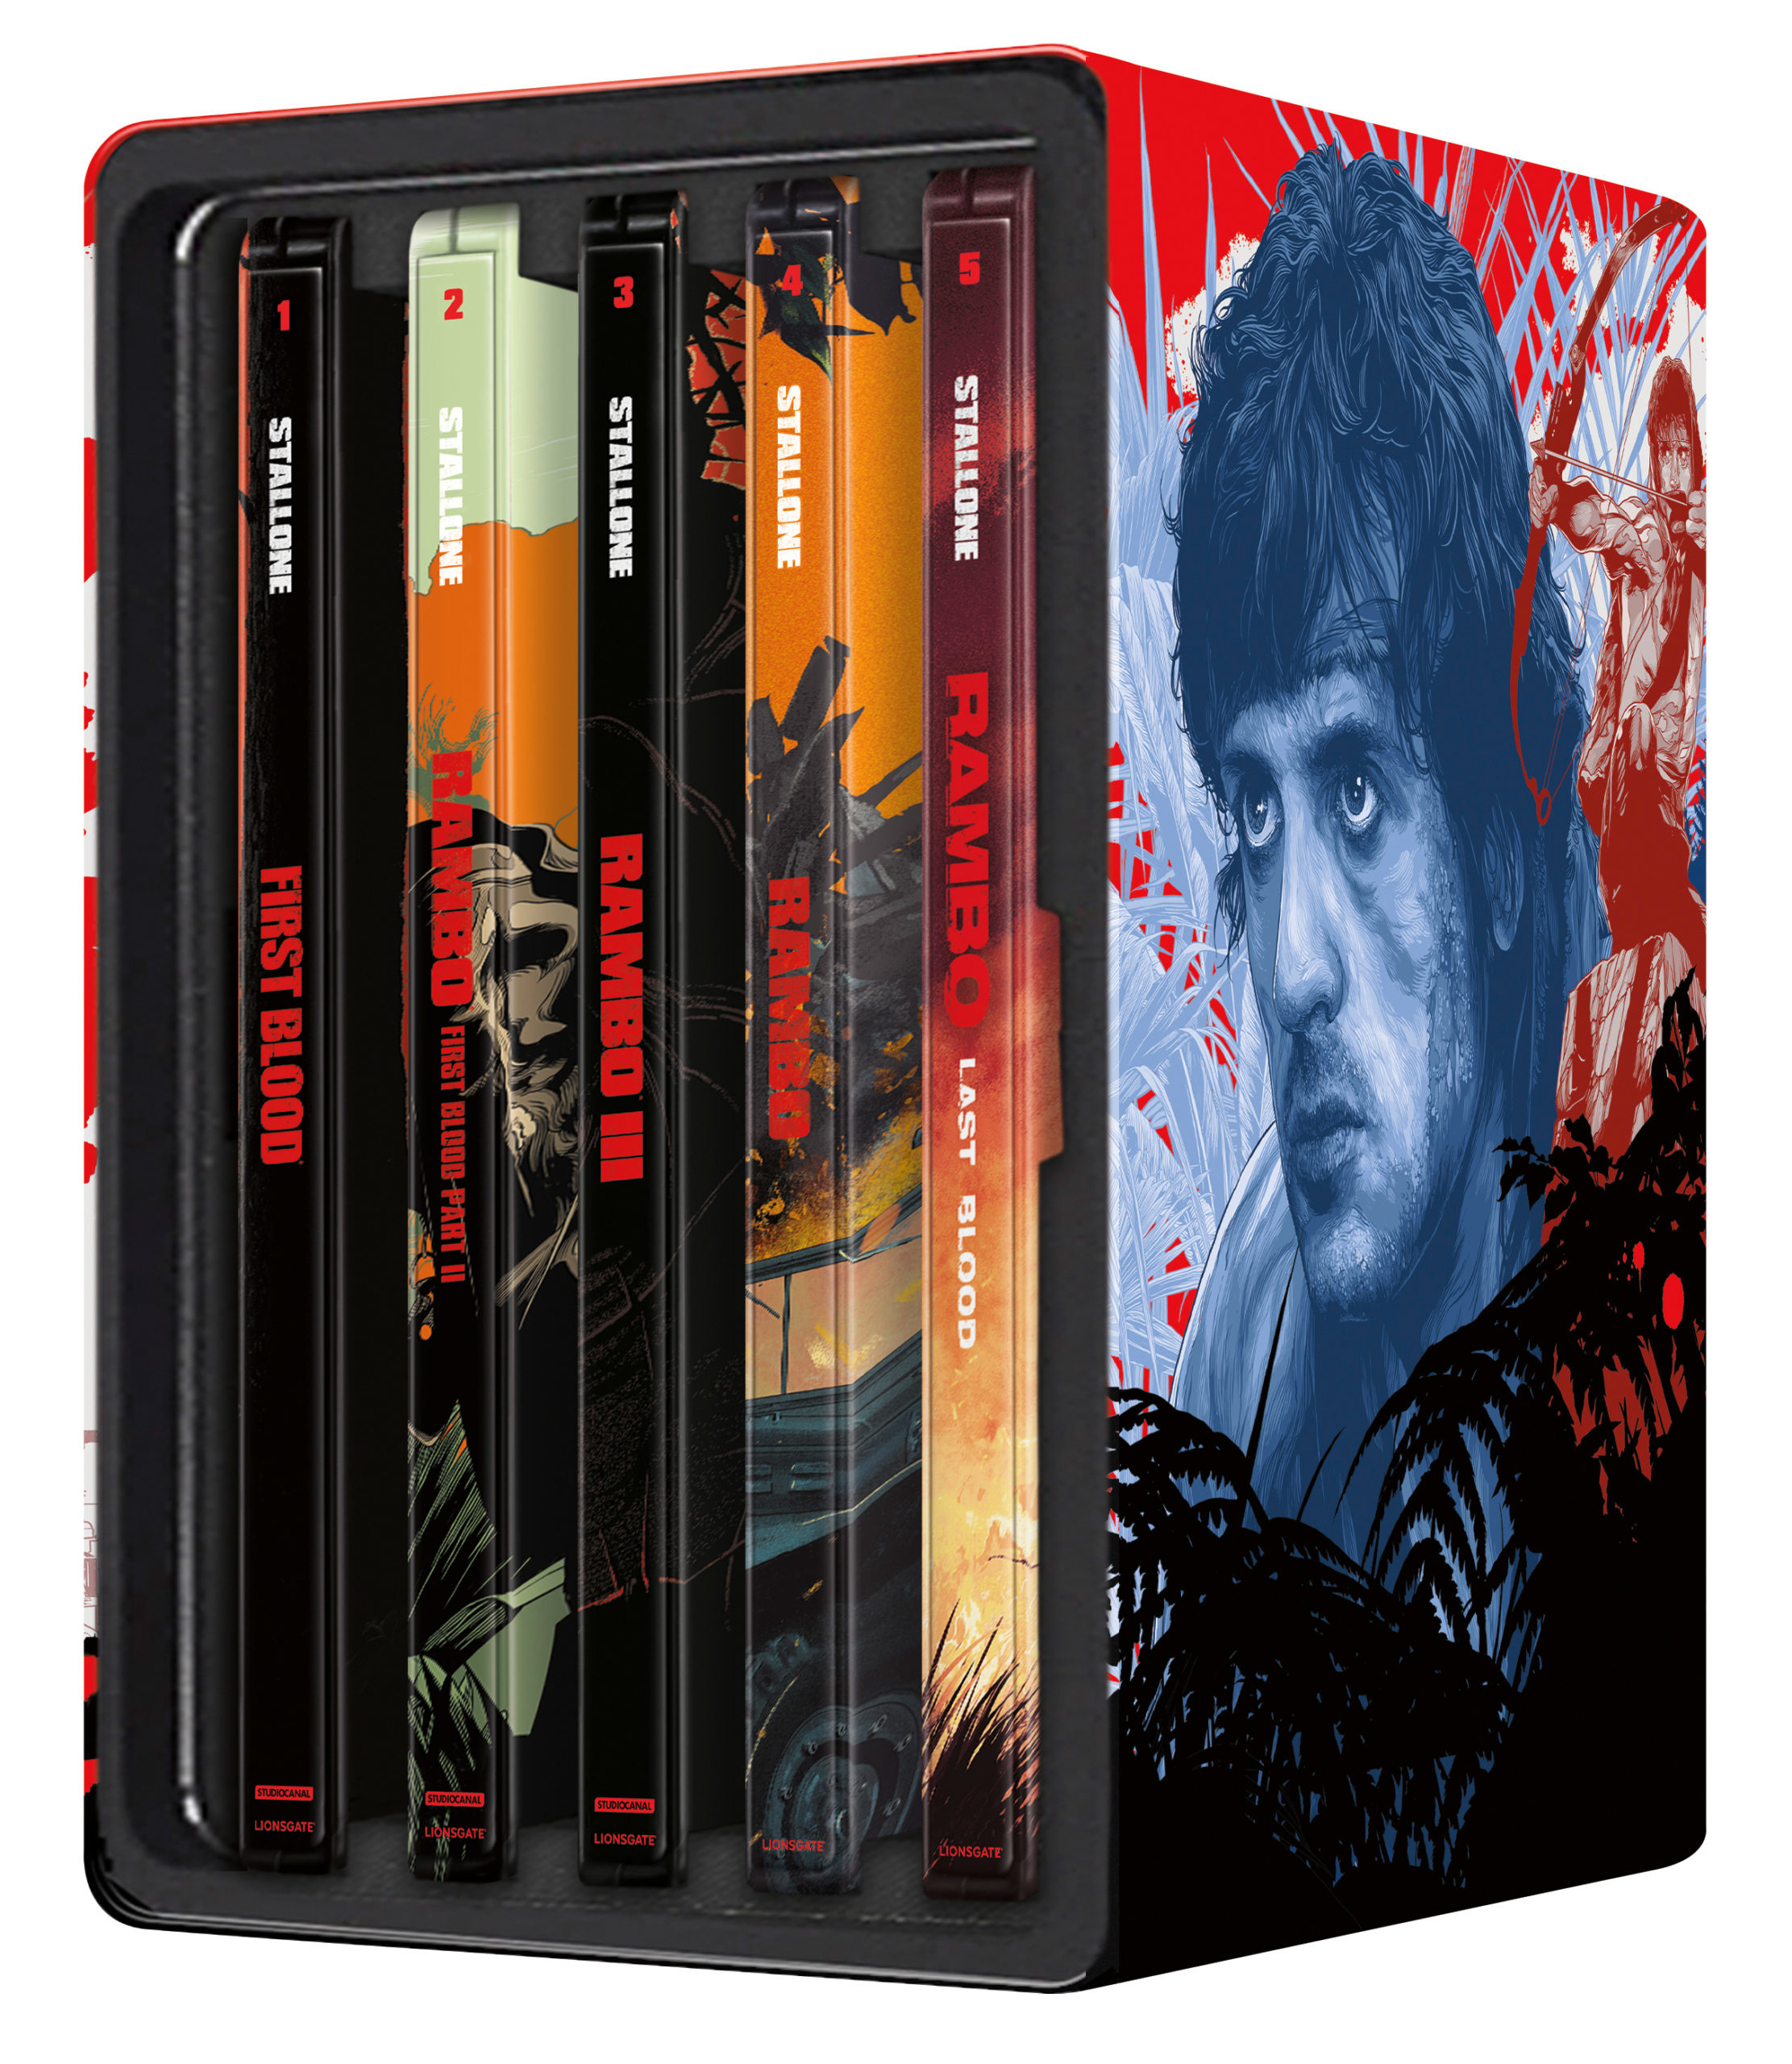 Holiday Gift Guide: ‘Rambo’ The Complete Steelbook Collection